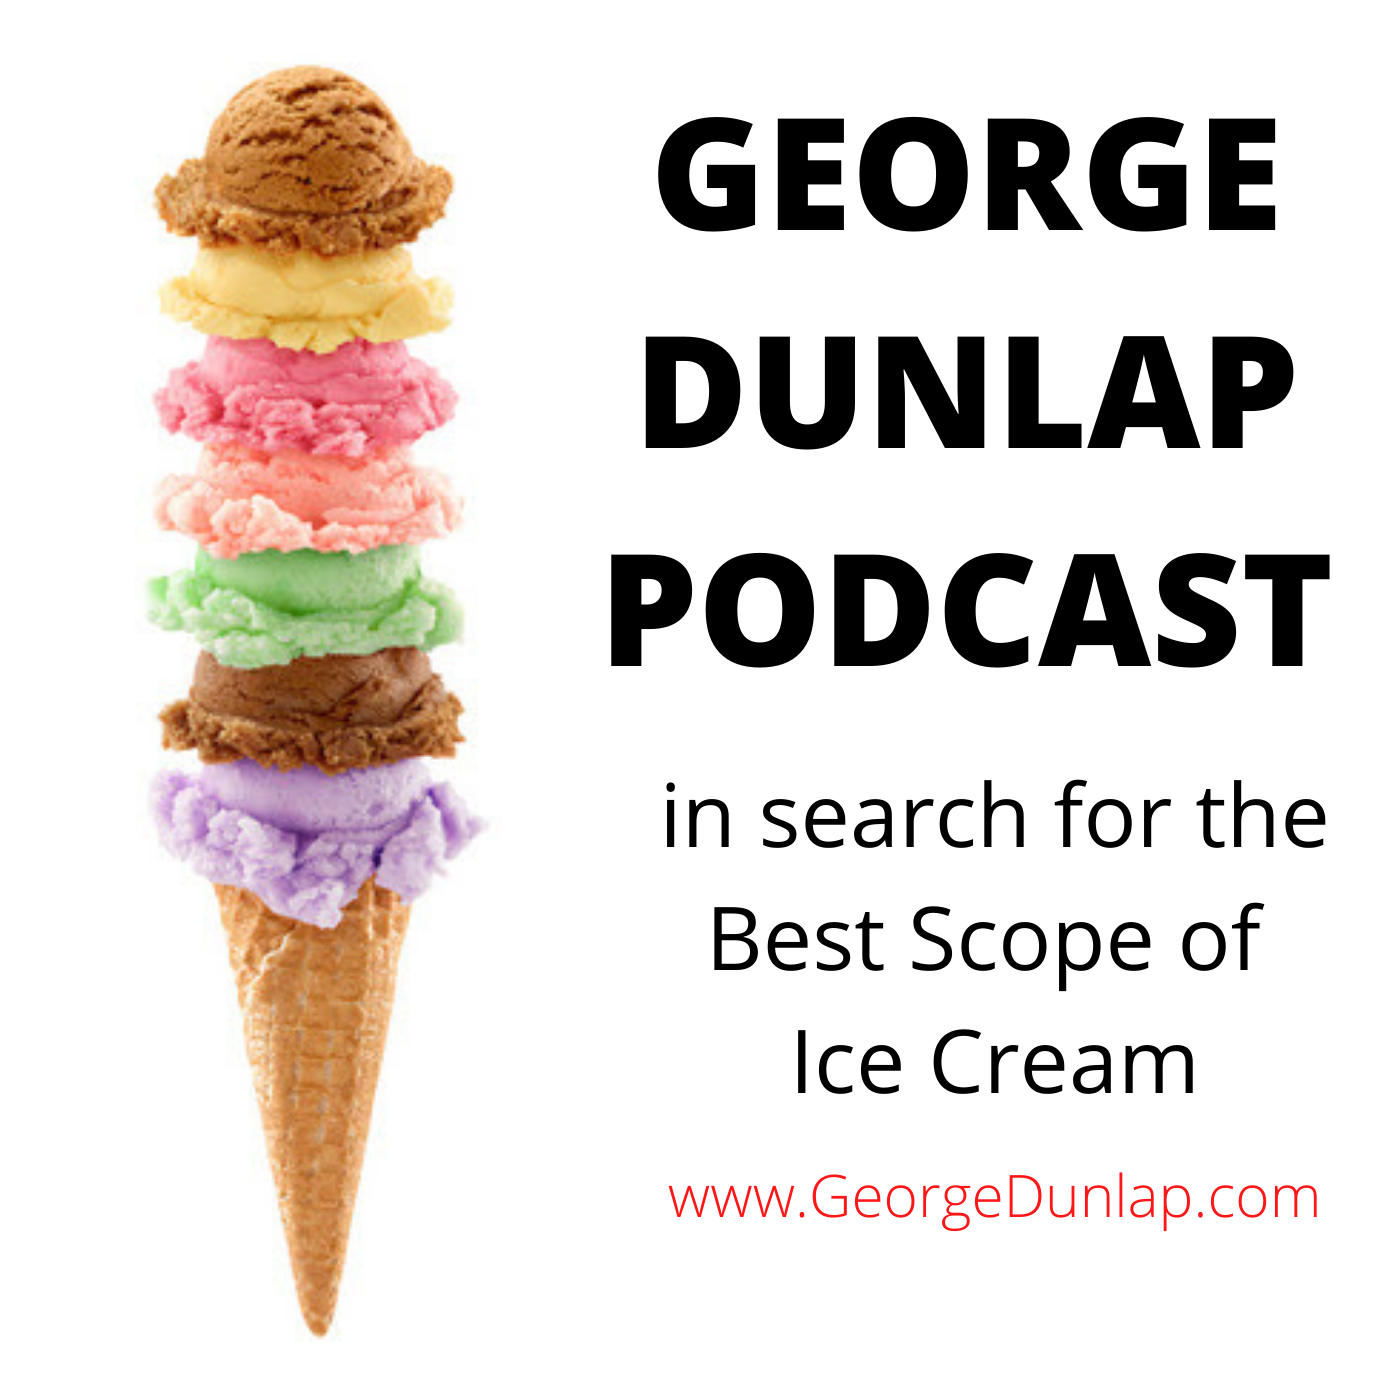 George Dunlap, The Ice Cream Guy "conversations with my friends (leaders) in the retail ice cream shop industry"